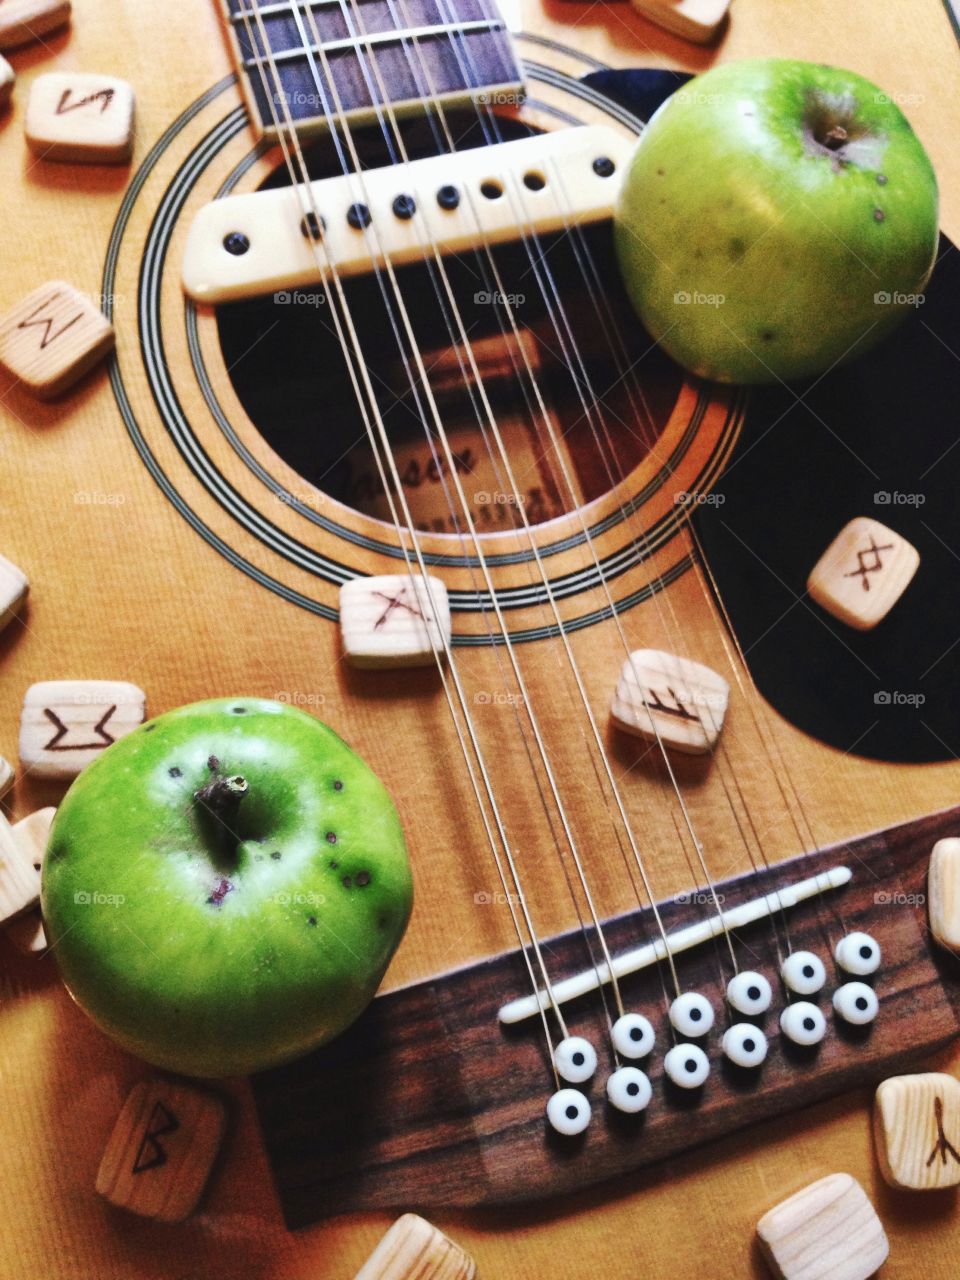 Tasty things... . Apples and runes on the guitar 